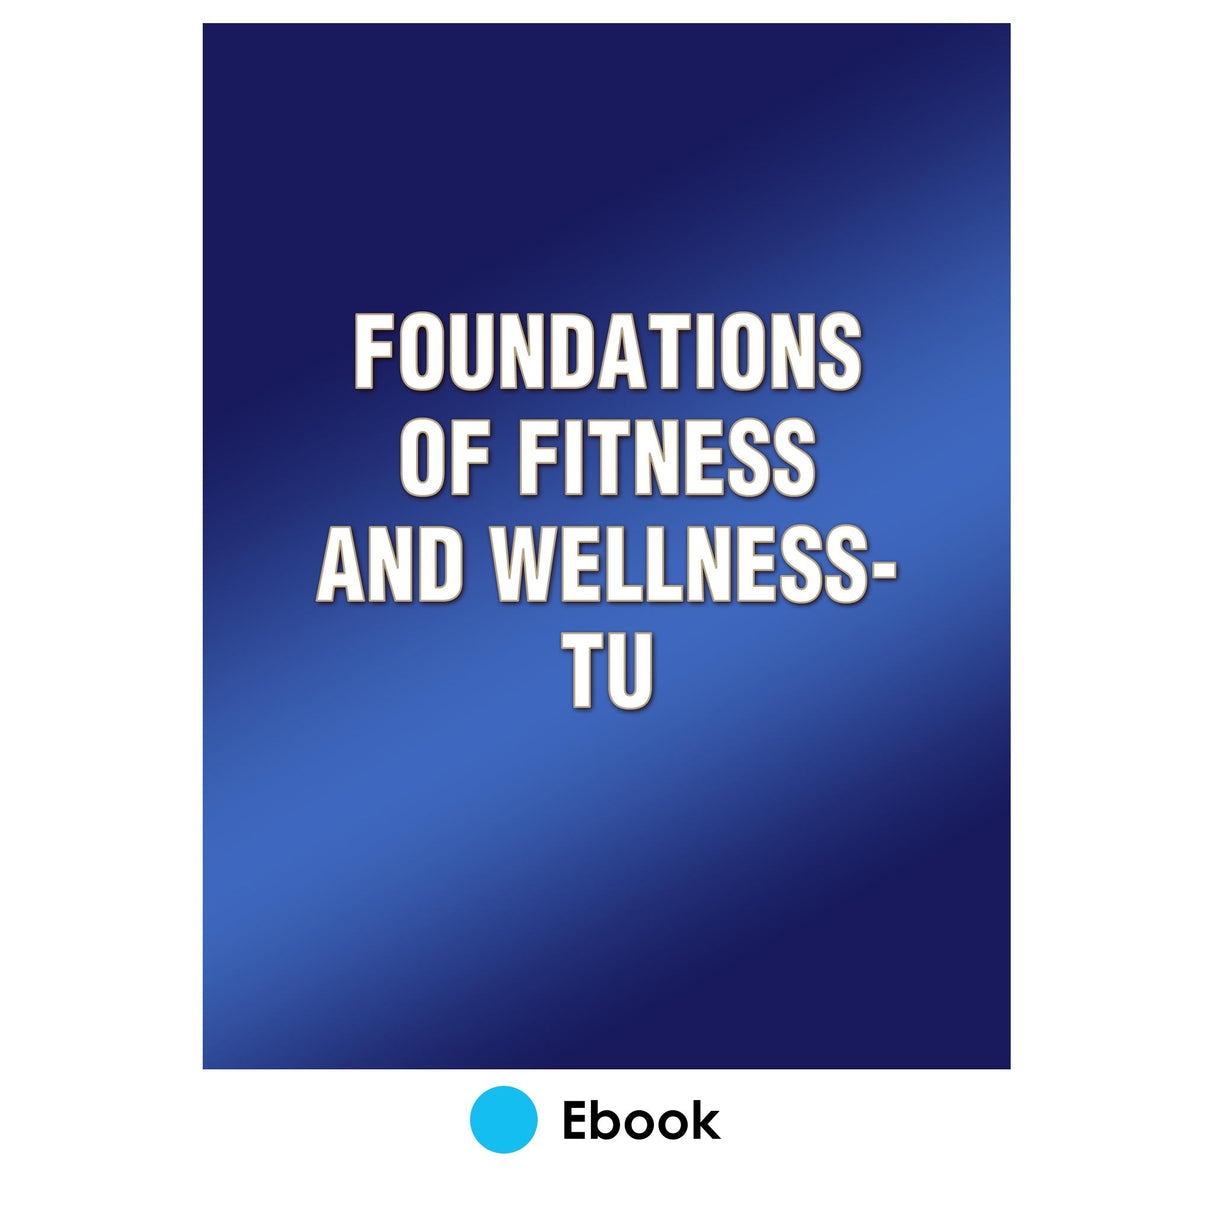 Foundations of Fitness and Wellness-TU